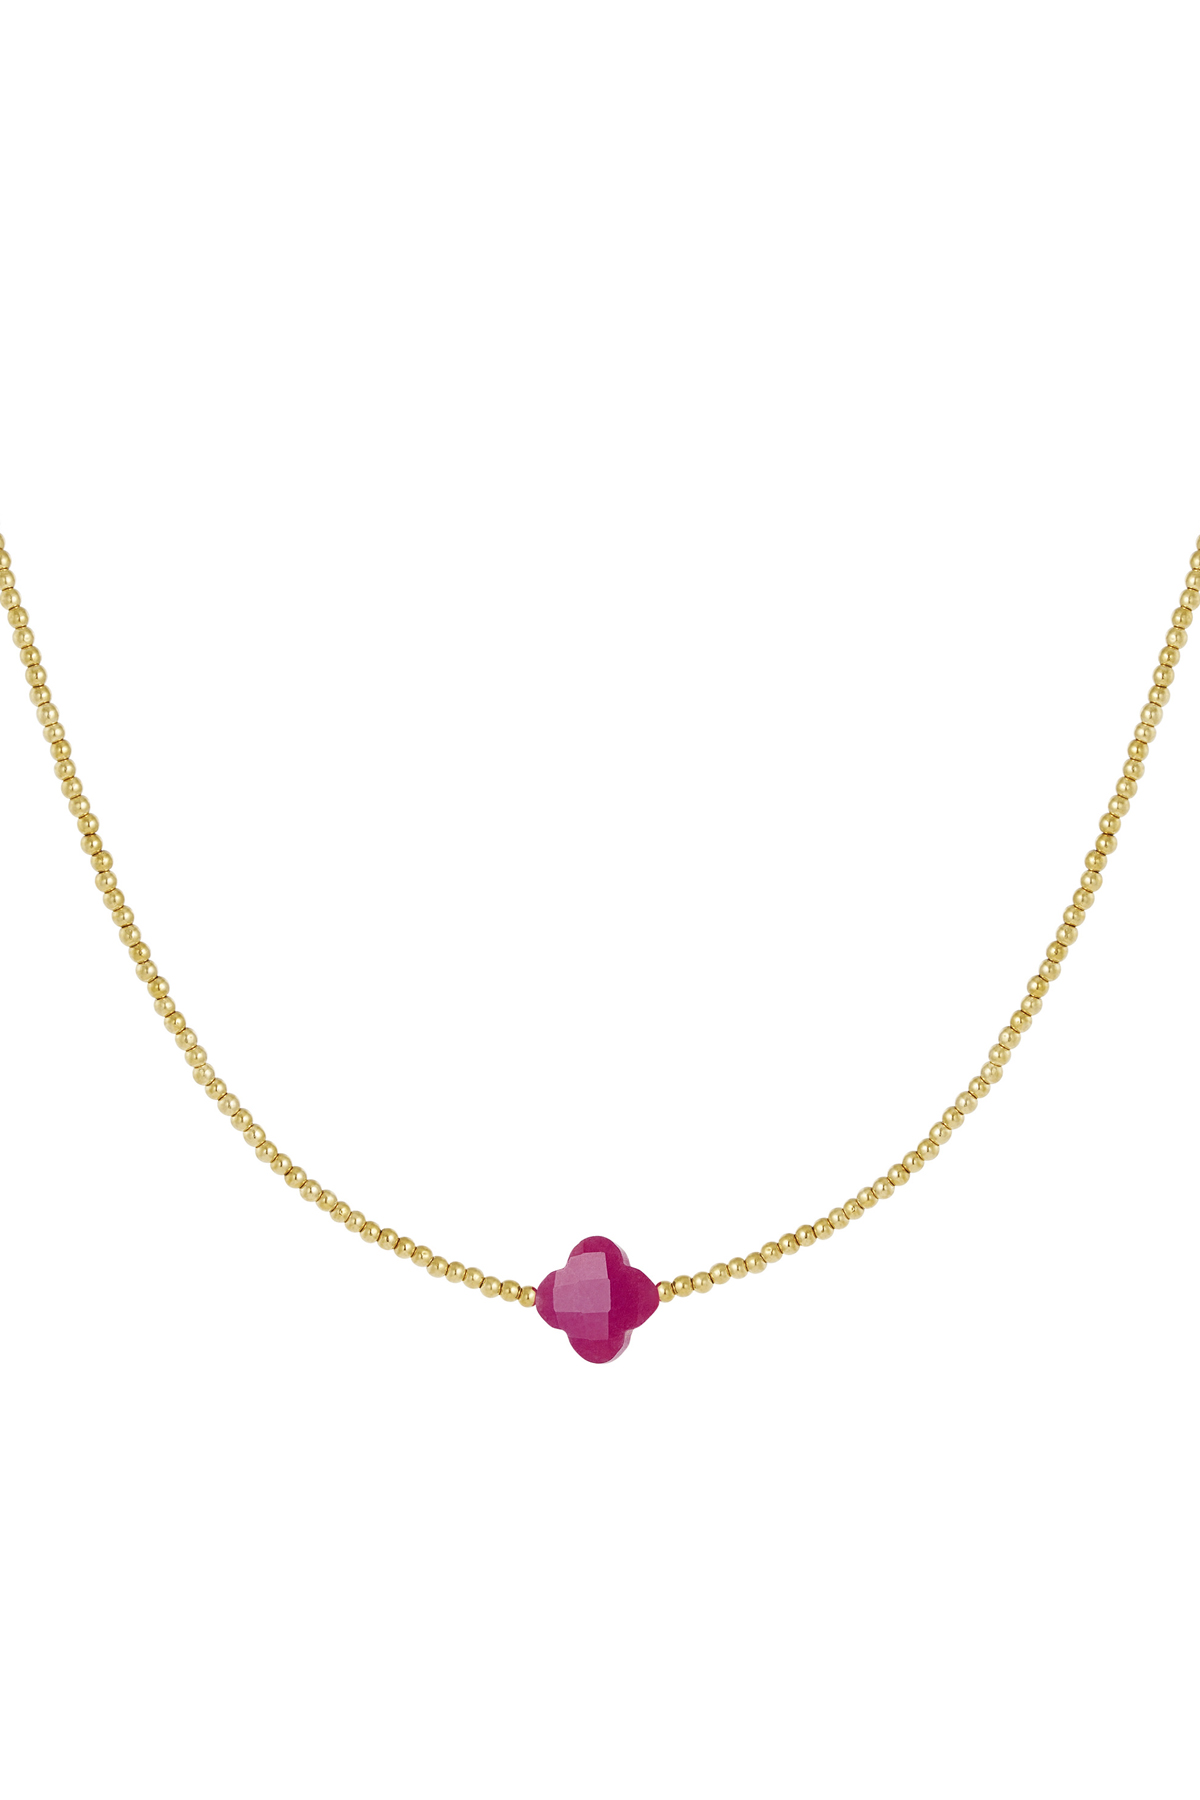 Beaded necklace clover - Natural stones collection Fuchsia Stainless Steel